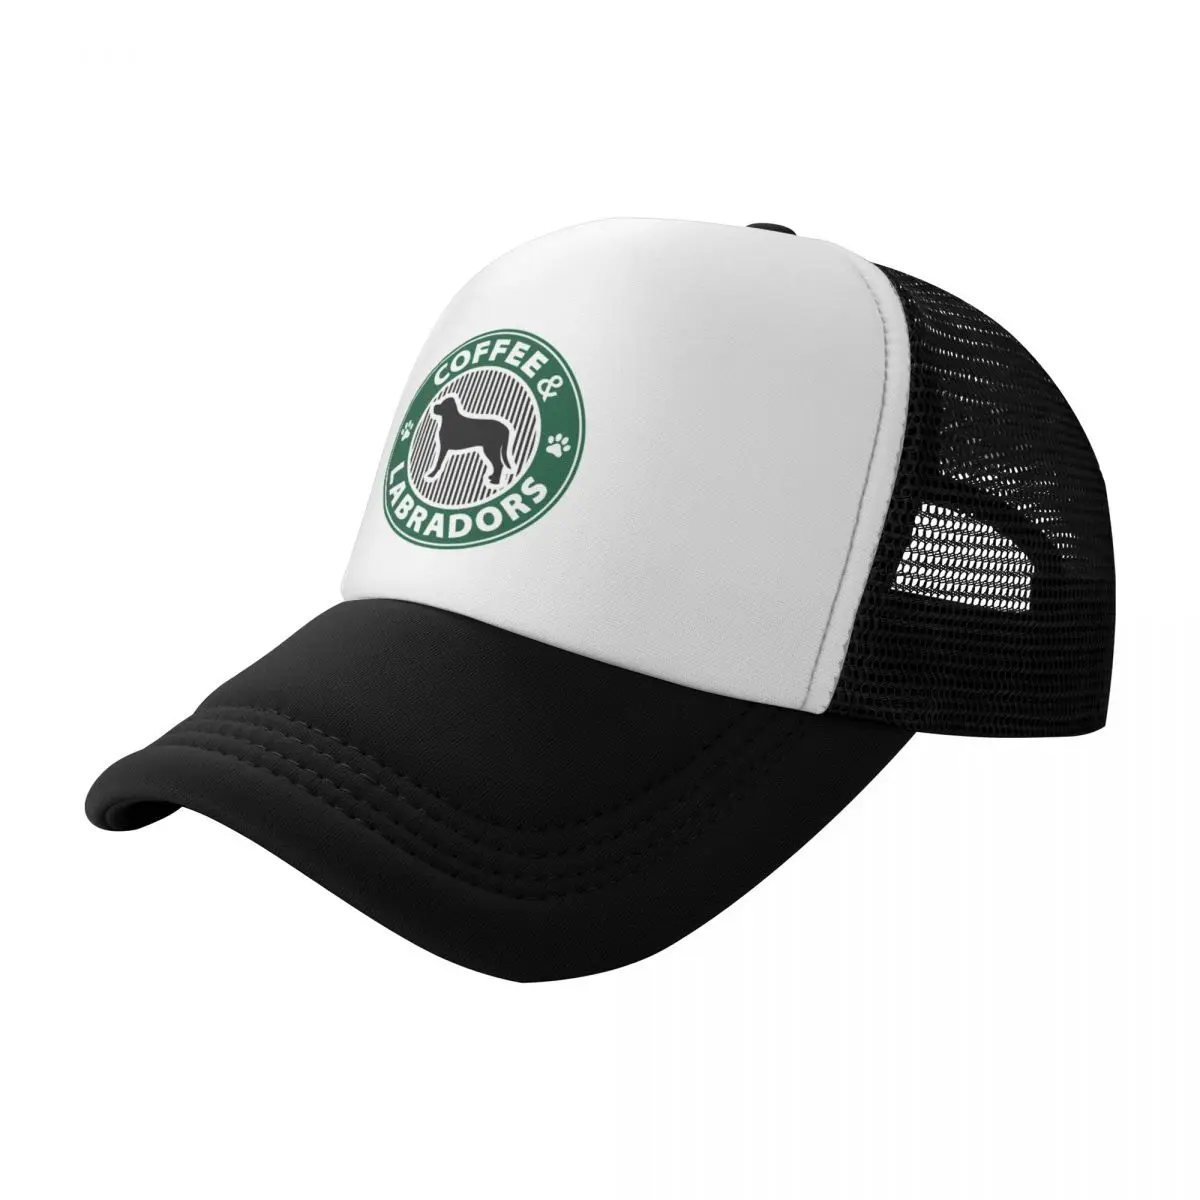 

Coffee and Labradors - Dog lovers - Dog mom - Dog dad Baseball Cap derby hat Thermal Visor Sunscreen Sun Hats For Women Men's